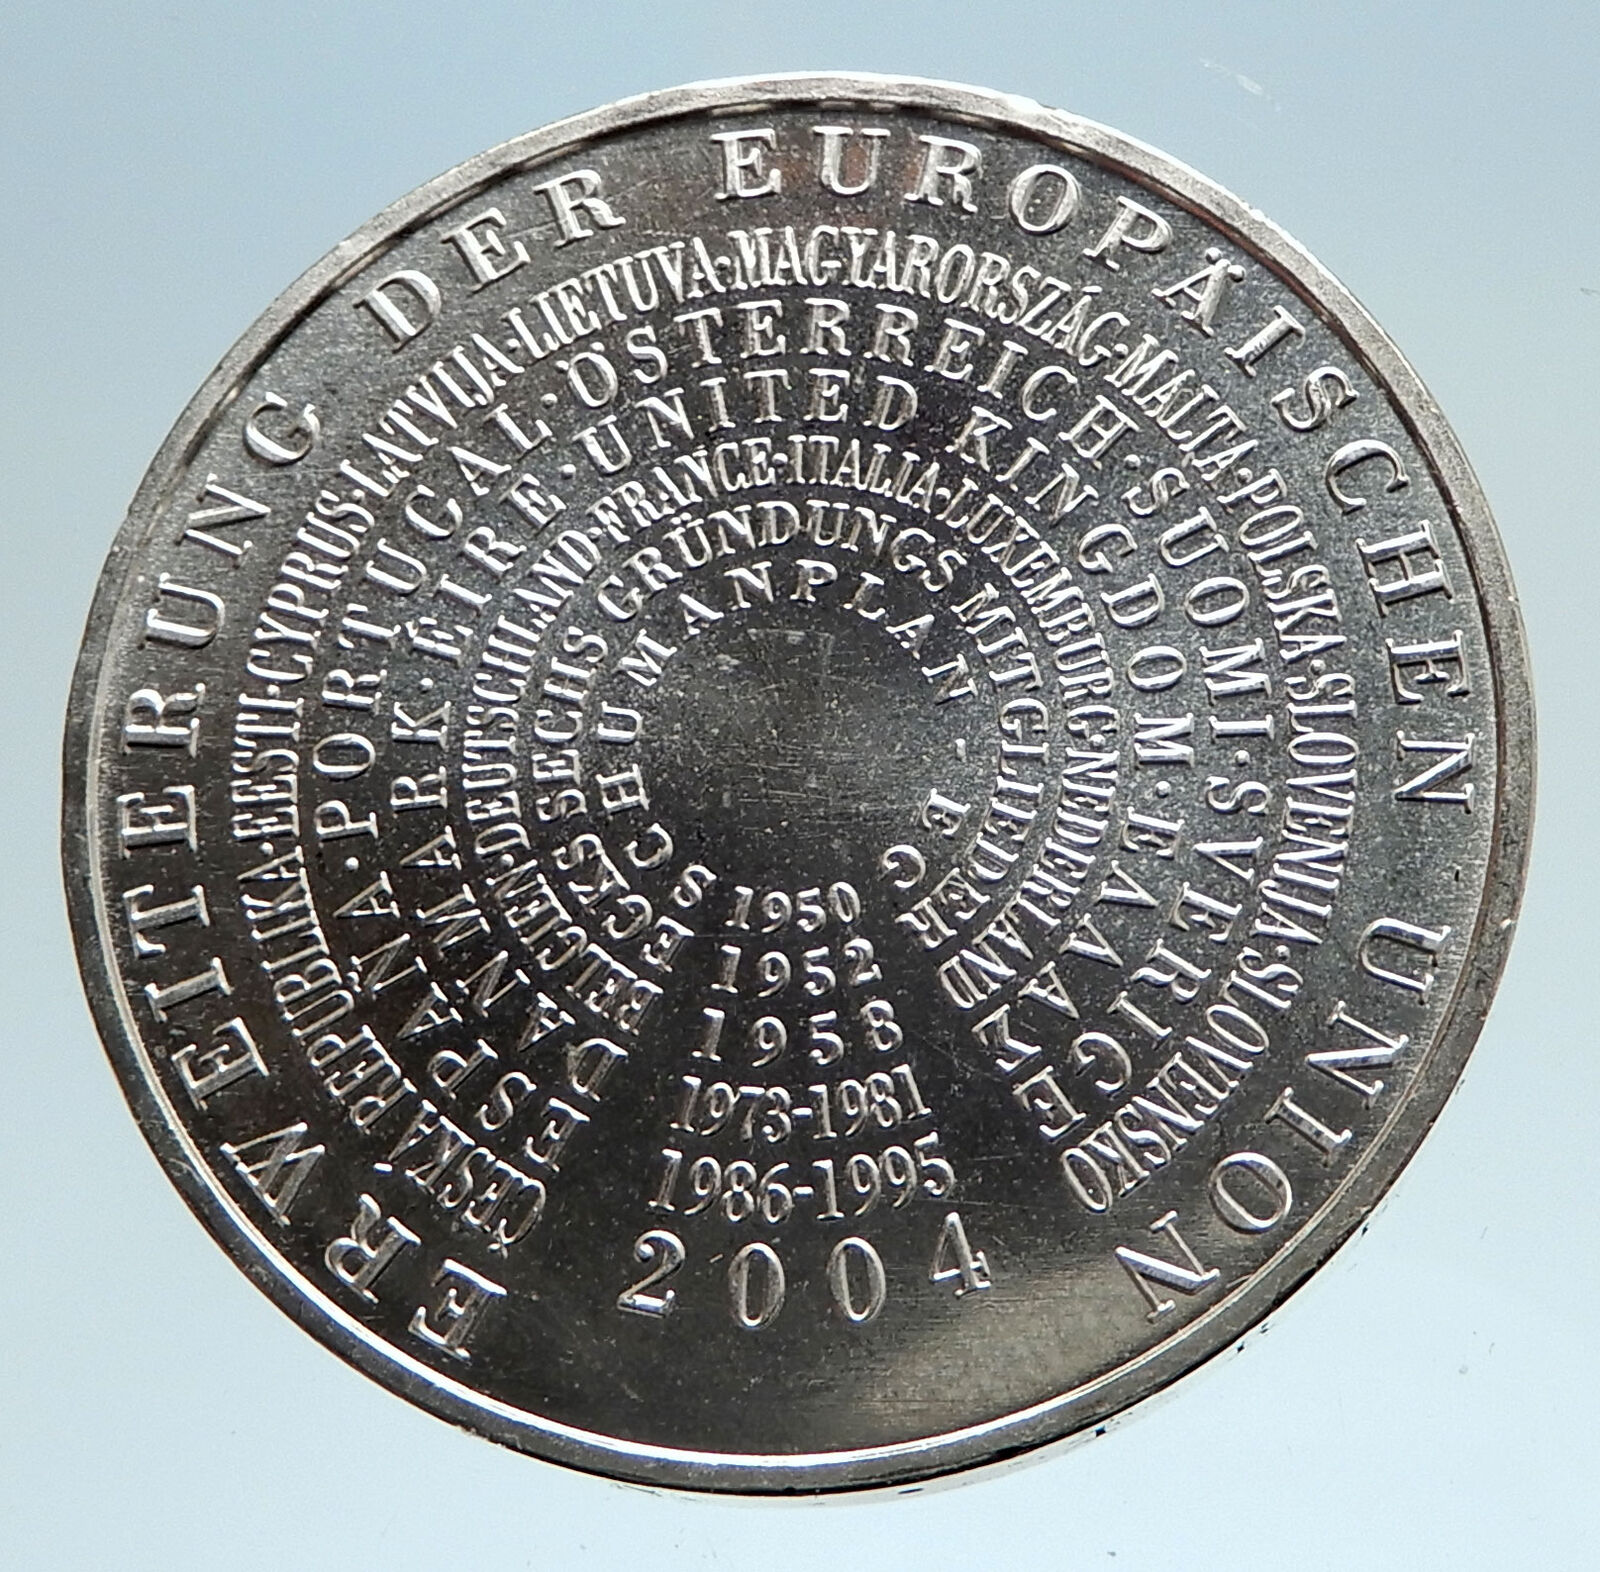 2004 GERMANY European Union EU Expansion Proof Silver German 10 Euro Coin i75023